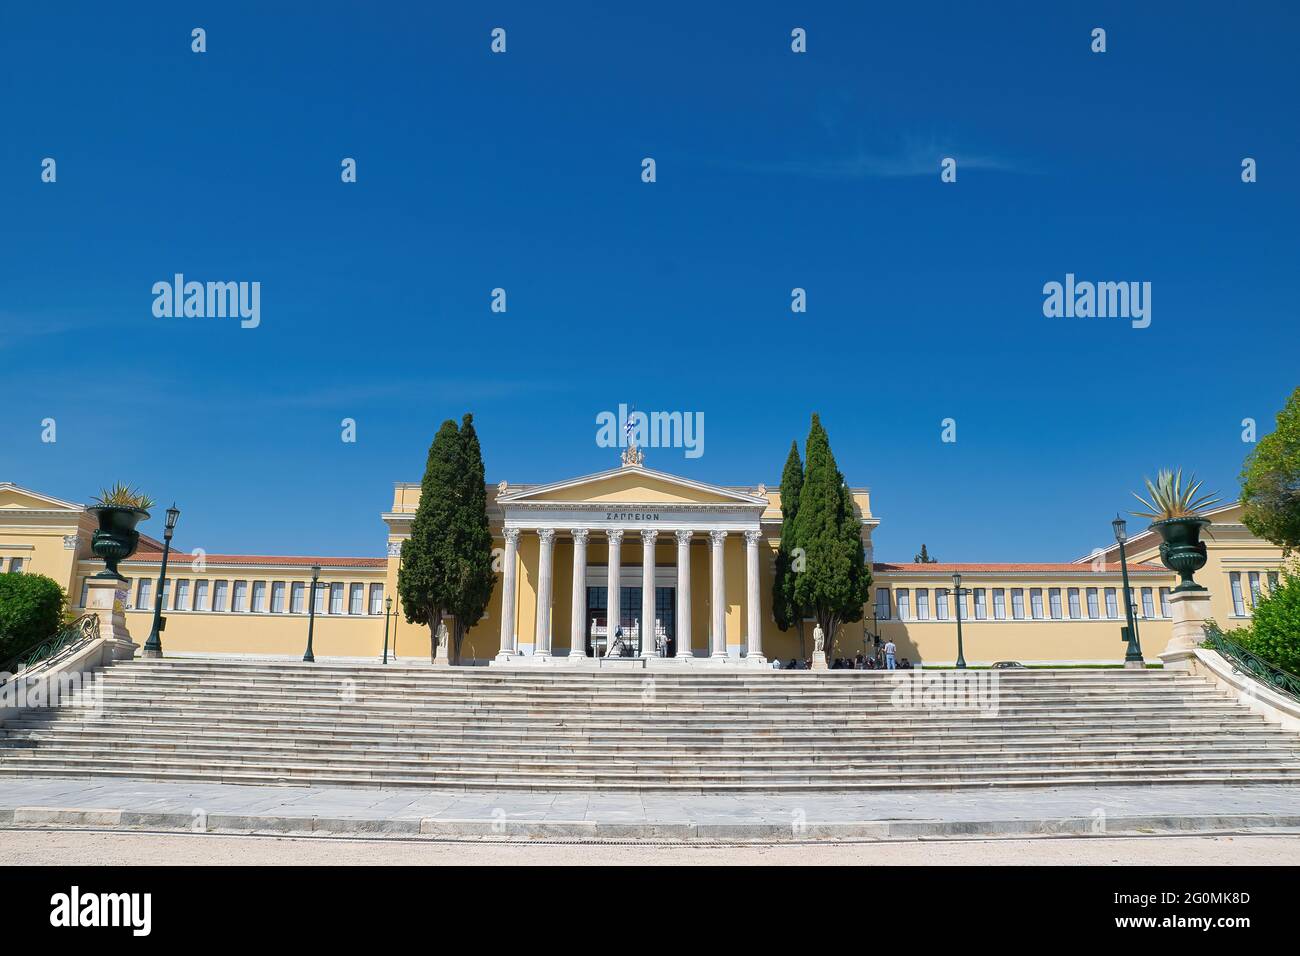 Zappeion Megaron is a part of national heritage of Greek civilization. Athens Greece, 5-20-2021 Stock Photo